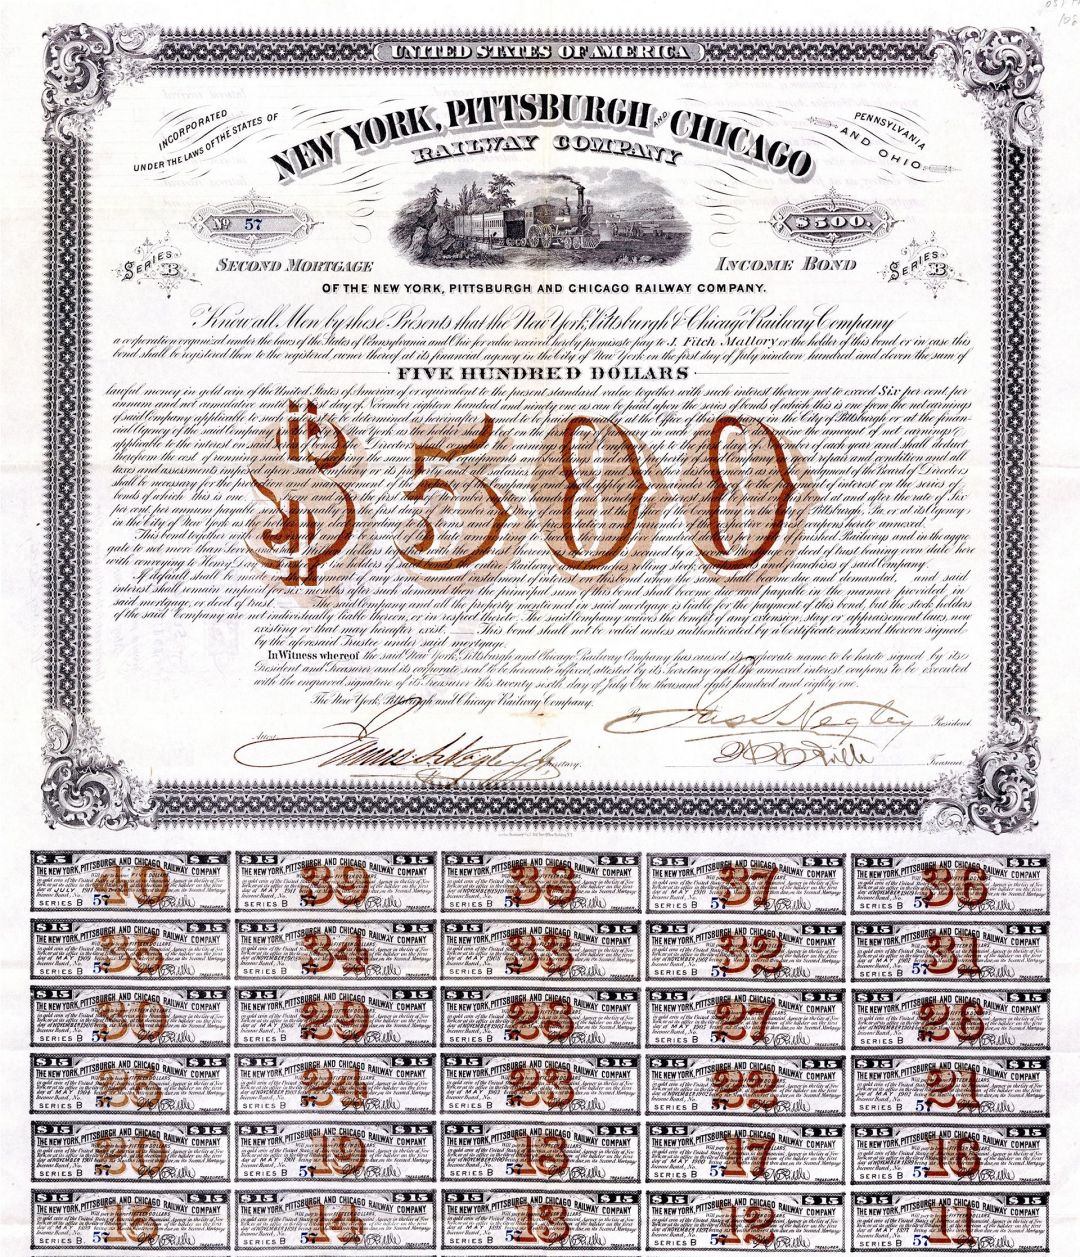 New York, Pittsburgh and Chicago Railway Co. - 1881 dated $500 Railroad Bond